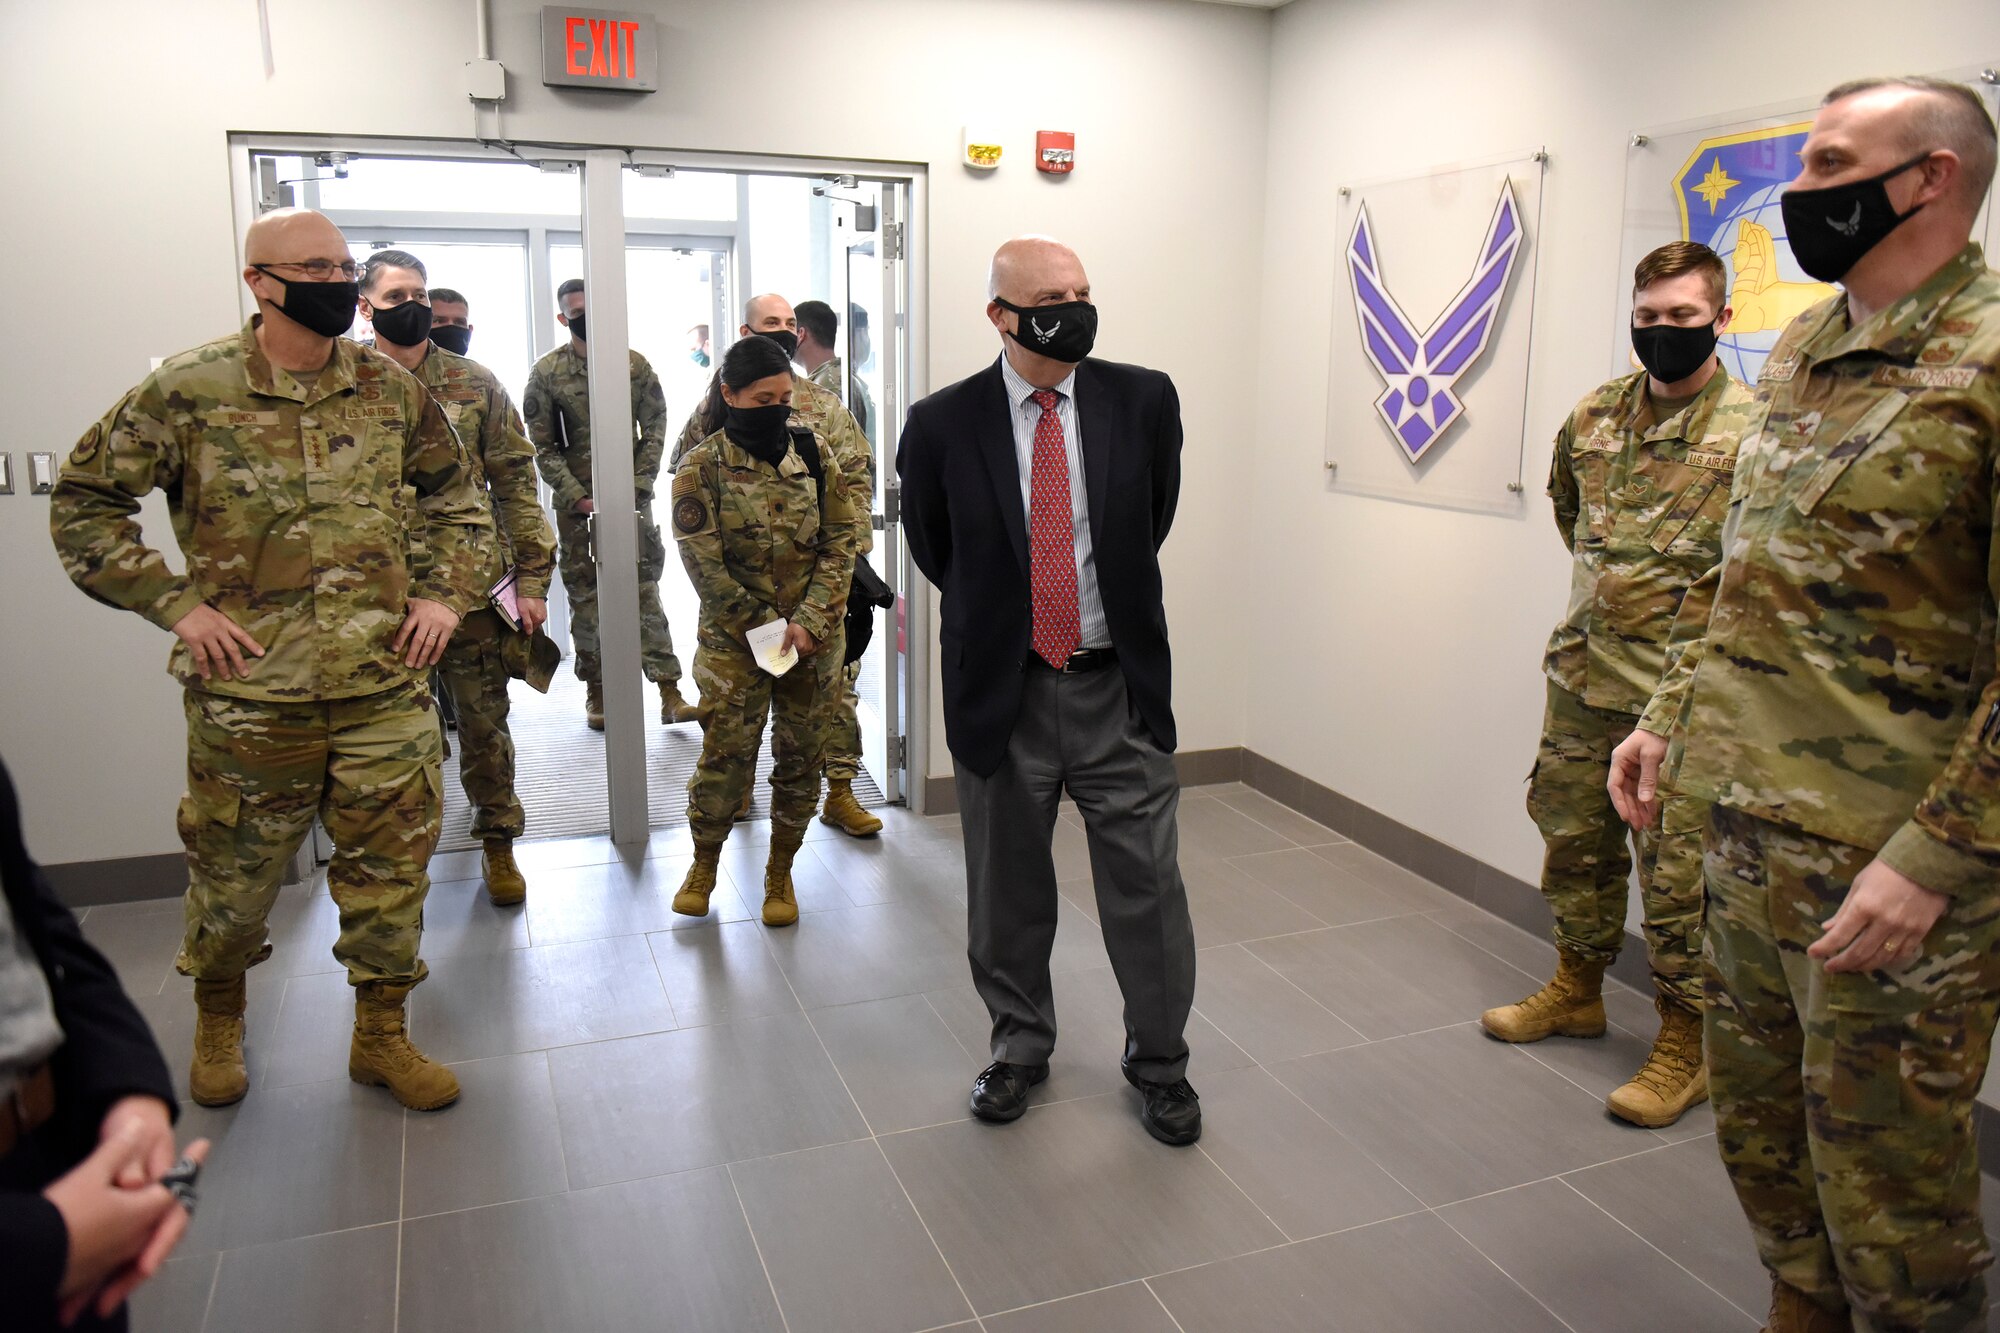 Acting Secretary of the Air Force John Roth greets Air Force personnel with the National Air and Space Intelligence Center at Wright-Patterson Air Force Base, Ohio, March 23, 2021.  Roth met with Air Force personnel and toured several facilities at the base including the U.S. Air Force School of Aerospace Medicine Epidemiology Laboratory, which is responsible for analyzing a majority of the COVID-19 tests in the Air Force. (U.S. Air Force photo by Ty Greenlees)